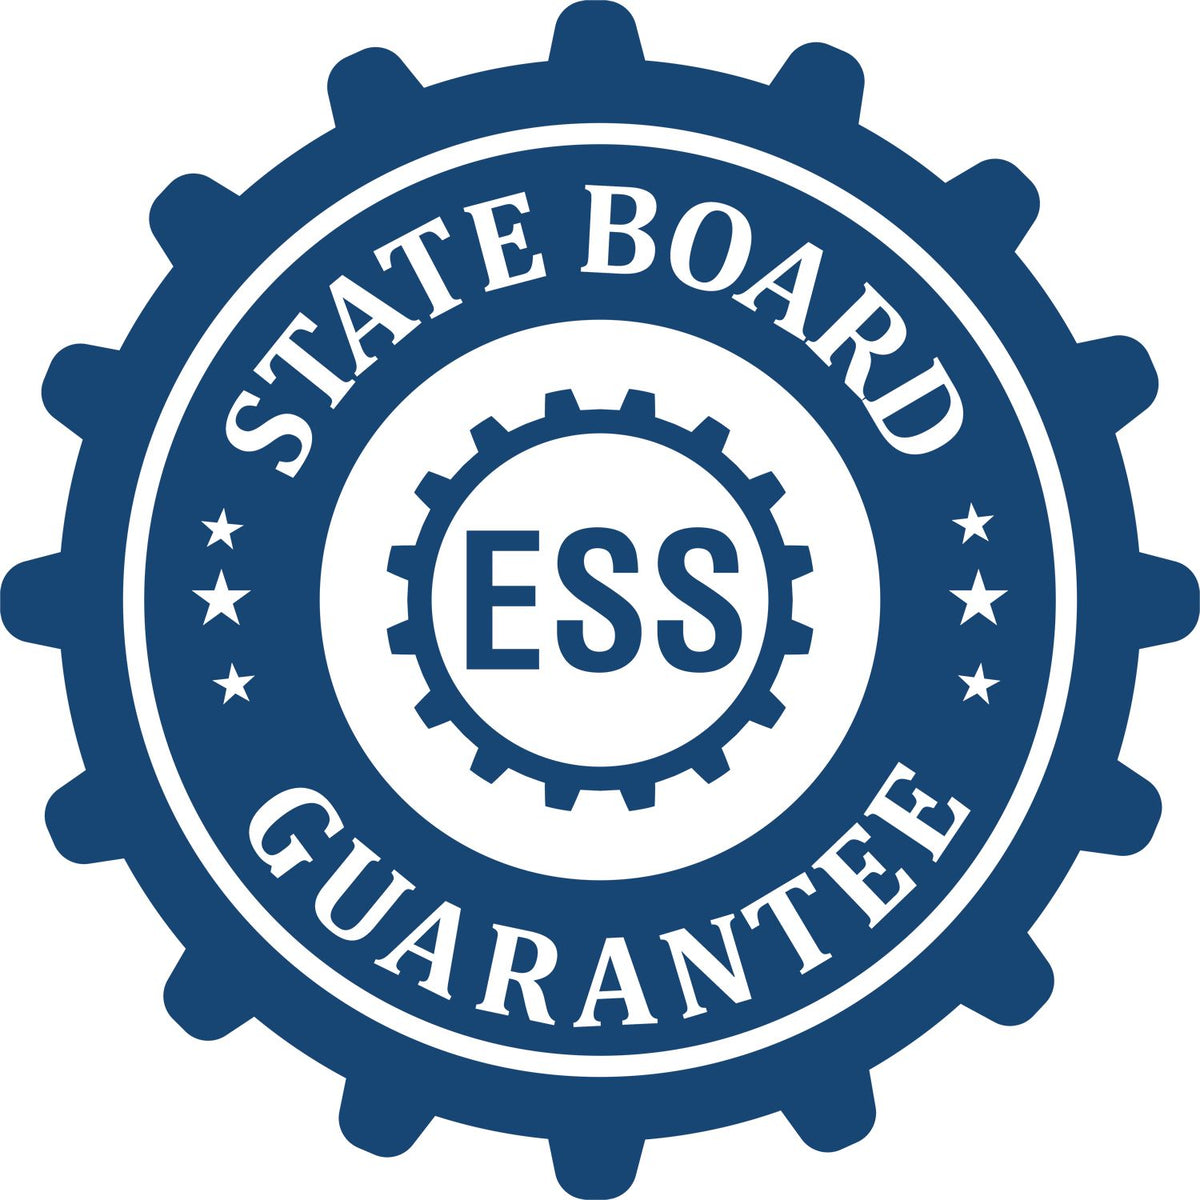 An emblem in a gear shape illustrating a state board guarantee for the Mississippi Geologist Desk Seal